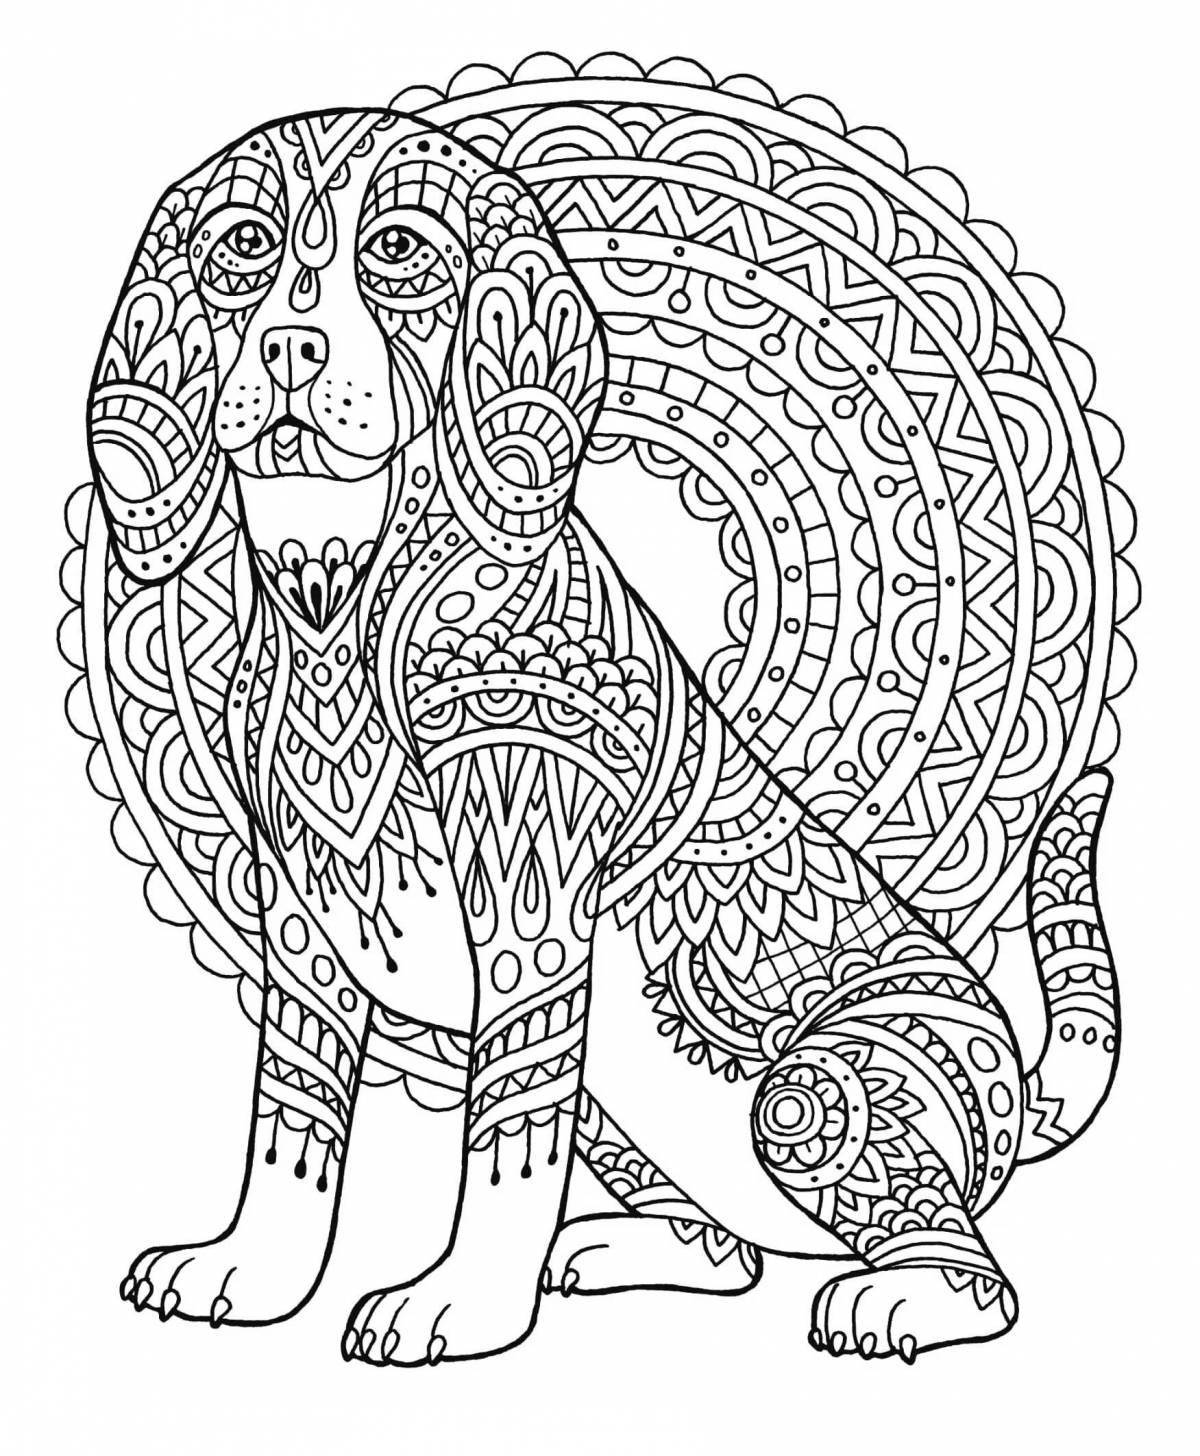 Soothing anti-stress animal coloring book